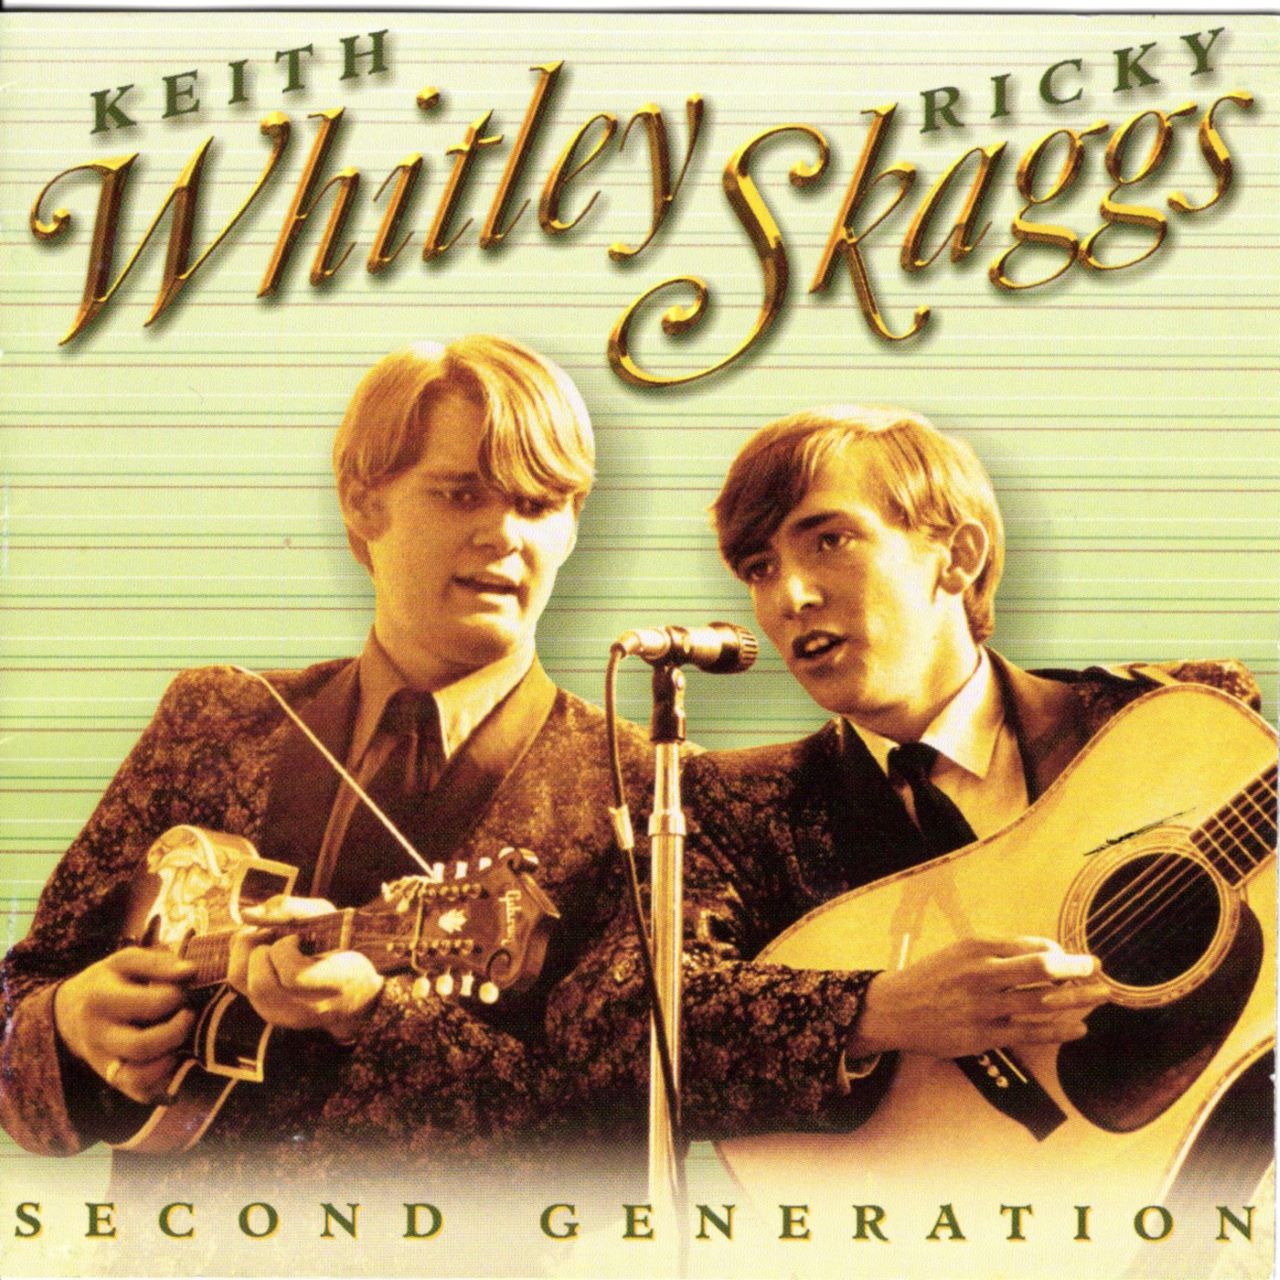 Keith Whitley & Ricky Skaggs - Second Generation cover album